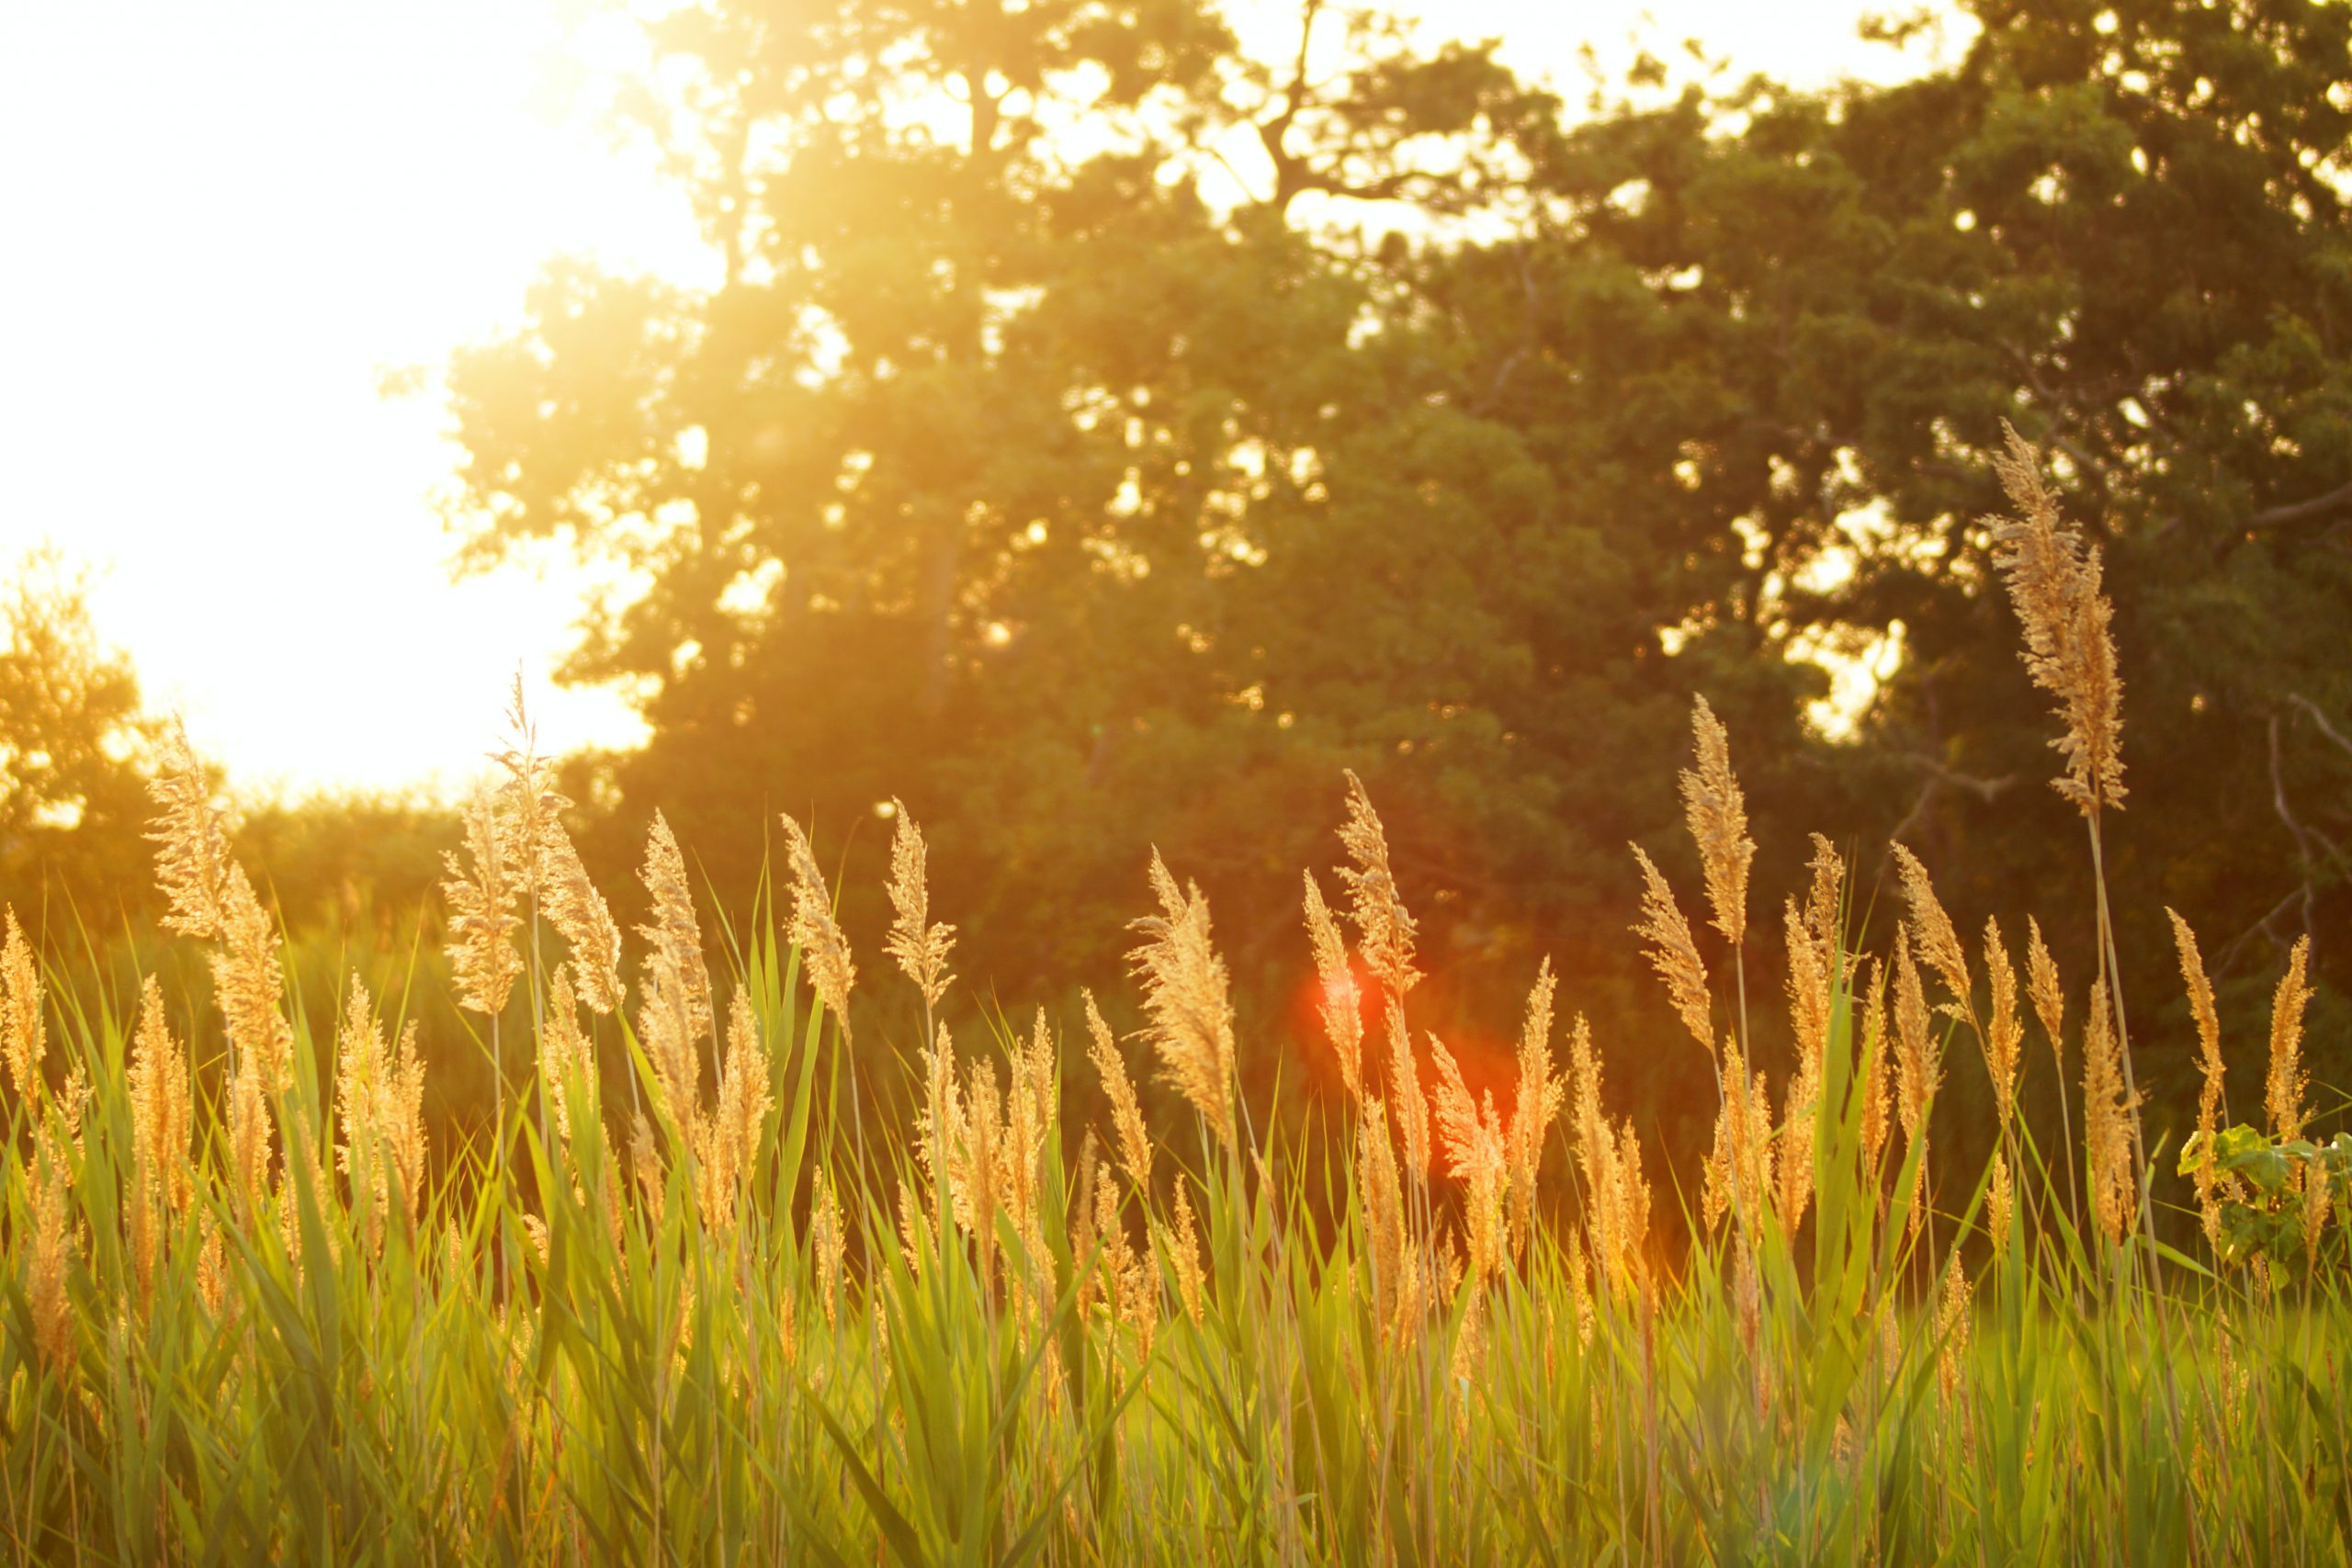 The Sun shining brightly upon grasses